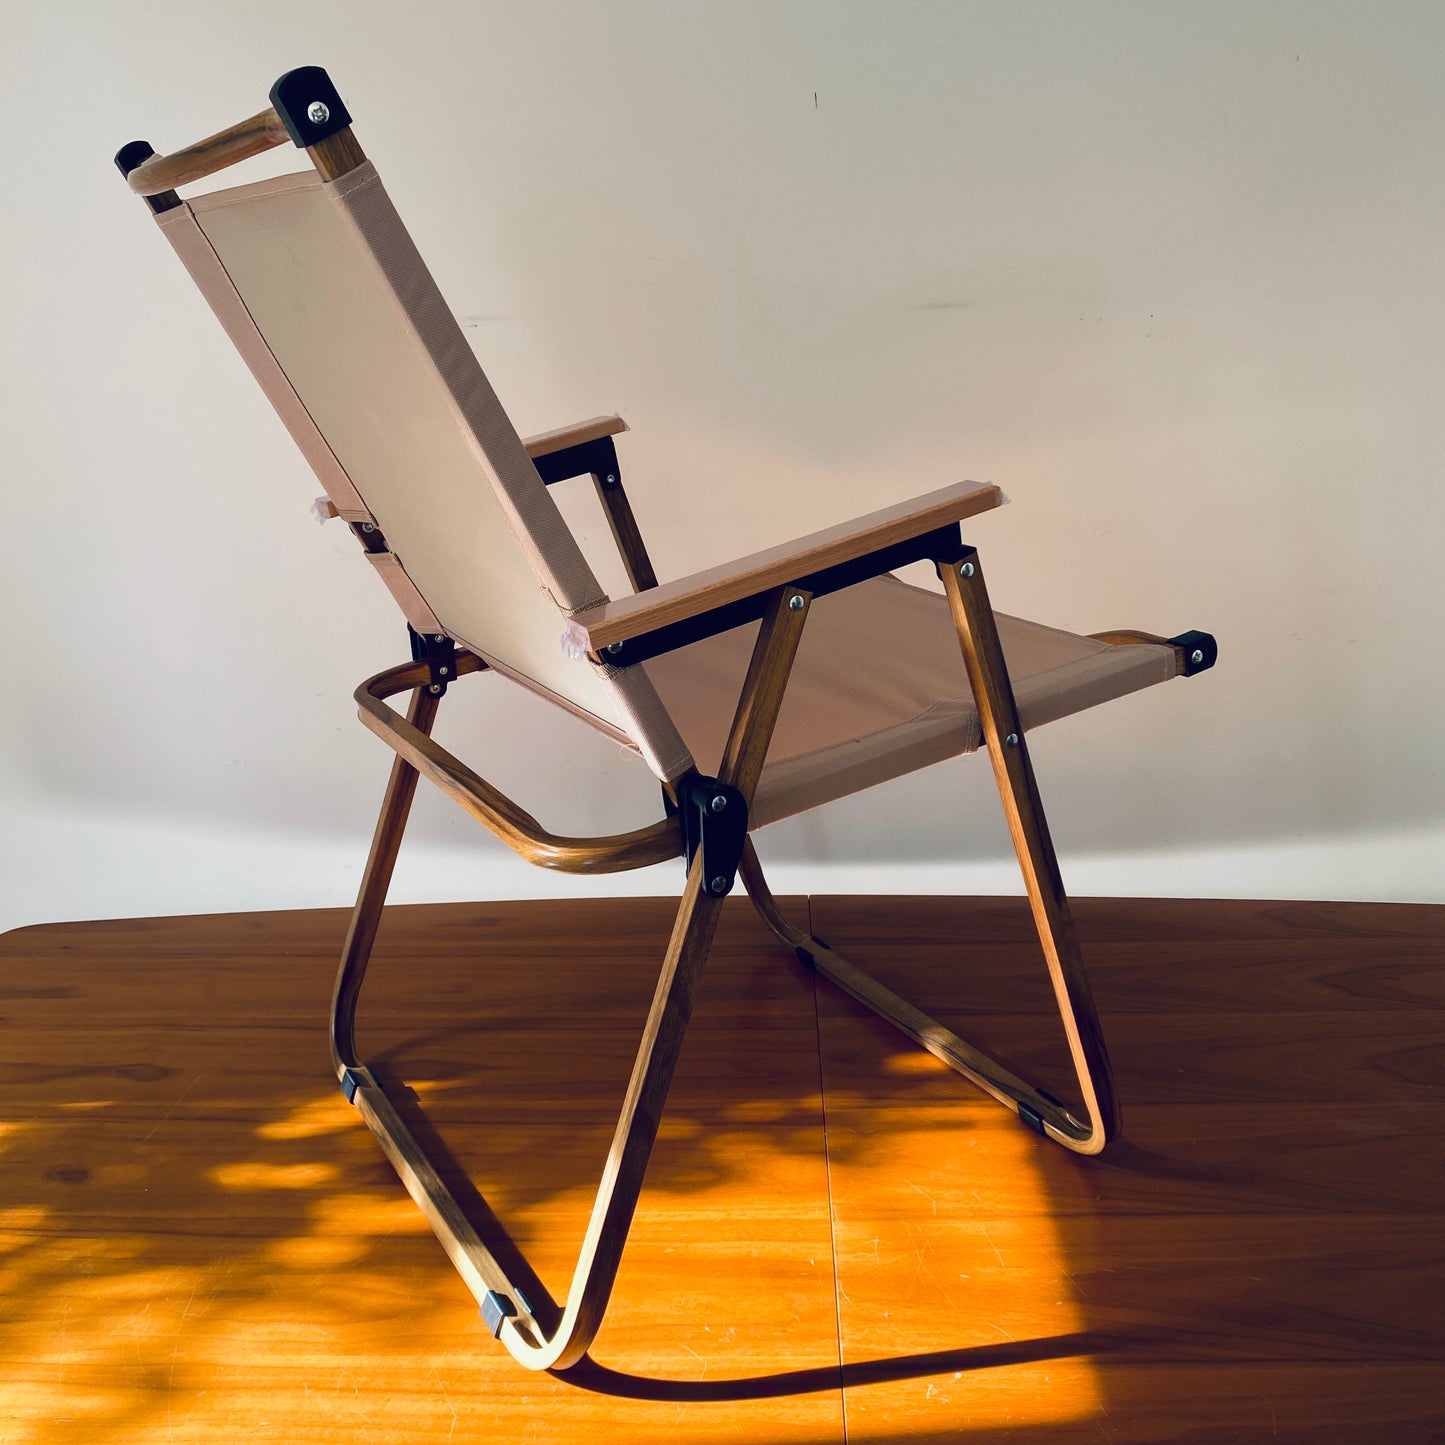 A back view of the foldable, portable, luxury safari chair by The Well Heeled Hippy